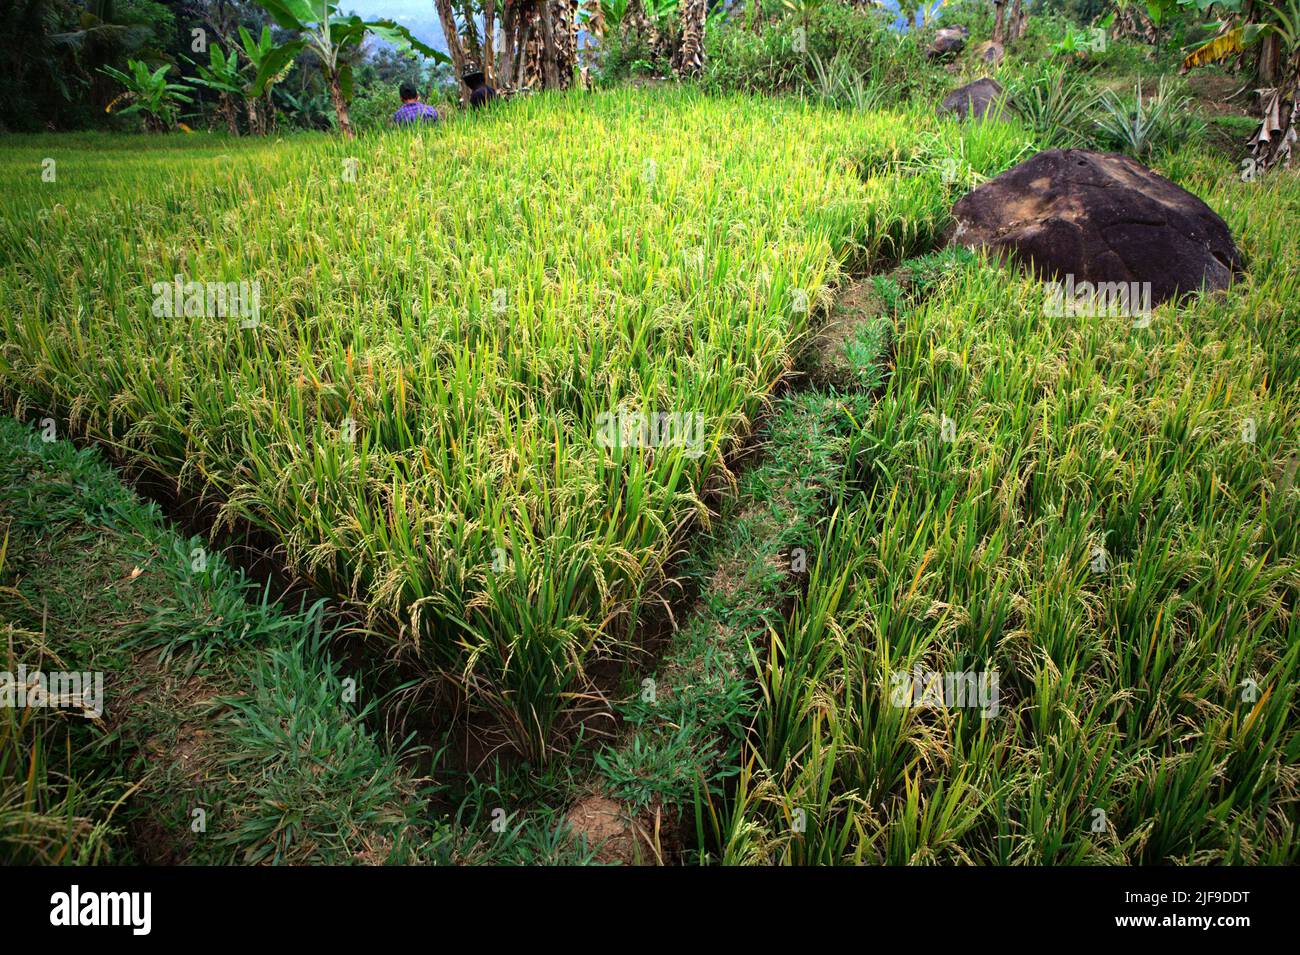 A rice field in Sumedang, West Java, Indonesia. Paddy rice cultivation is an important source of emissions and it is  increasing, on which Asia is identified as responsible for 89% of global rice cultivation emissions, according to Intergovernmental Panel on Climate Change (IPCC) in their 2022 report. Stock Photo